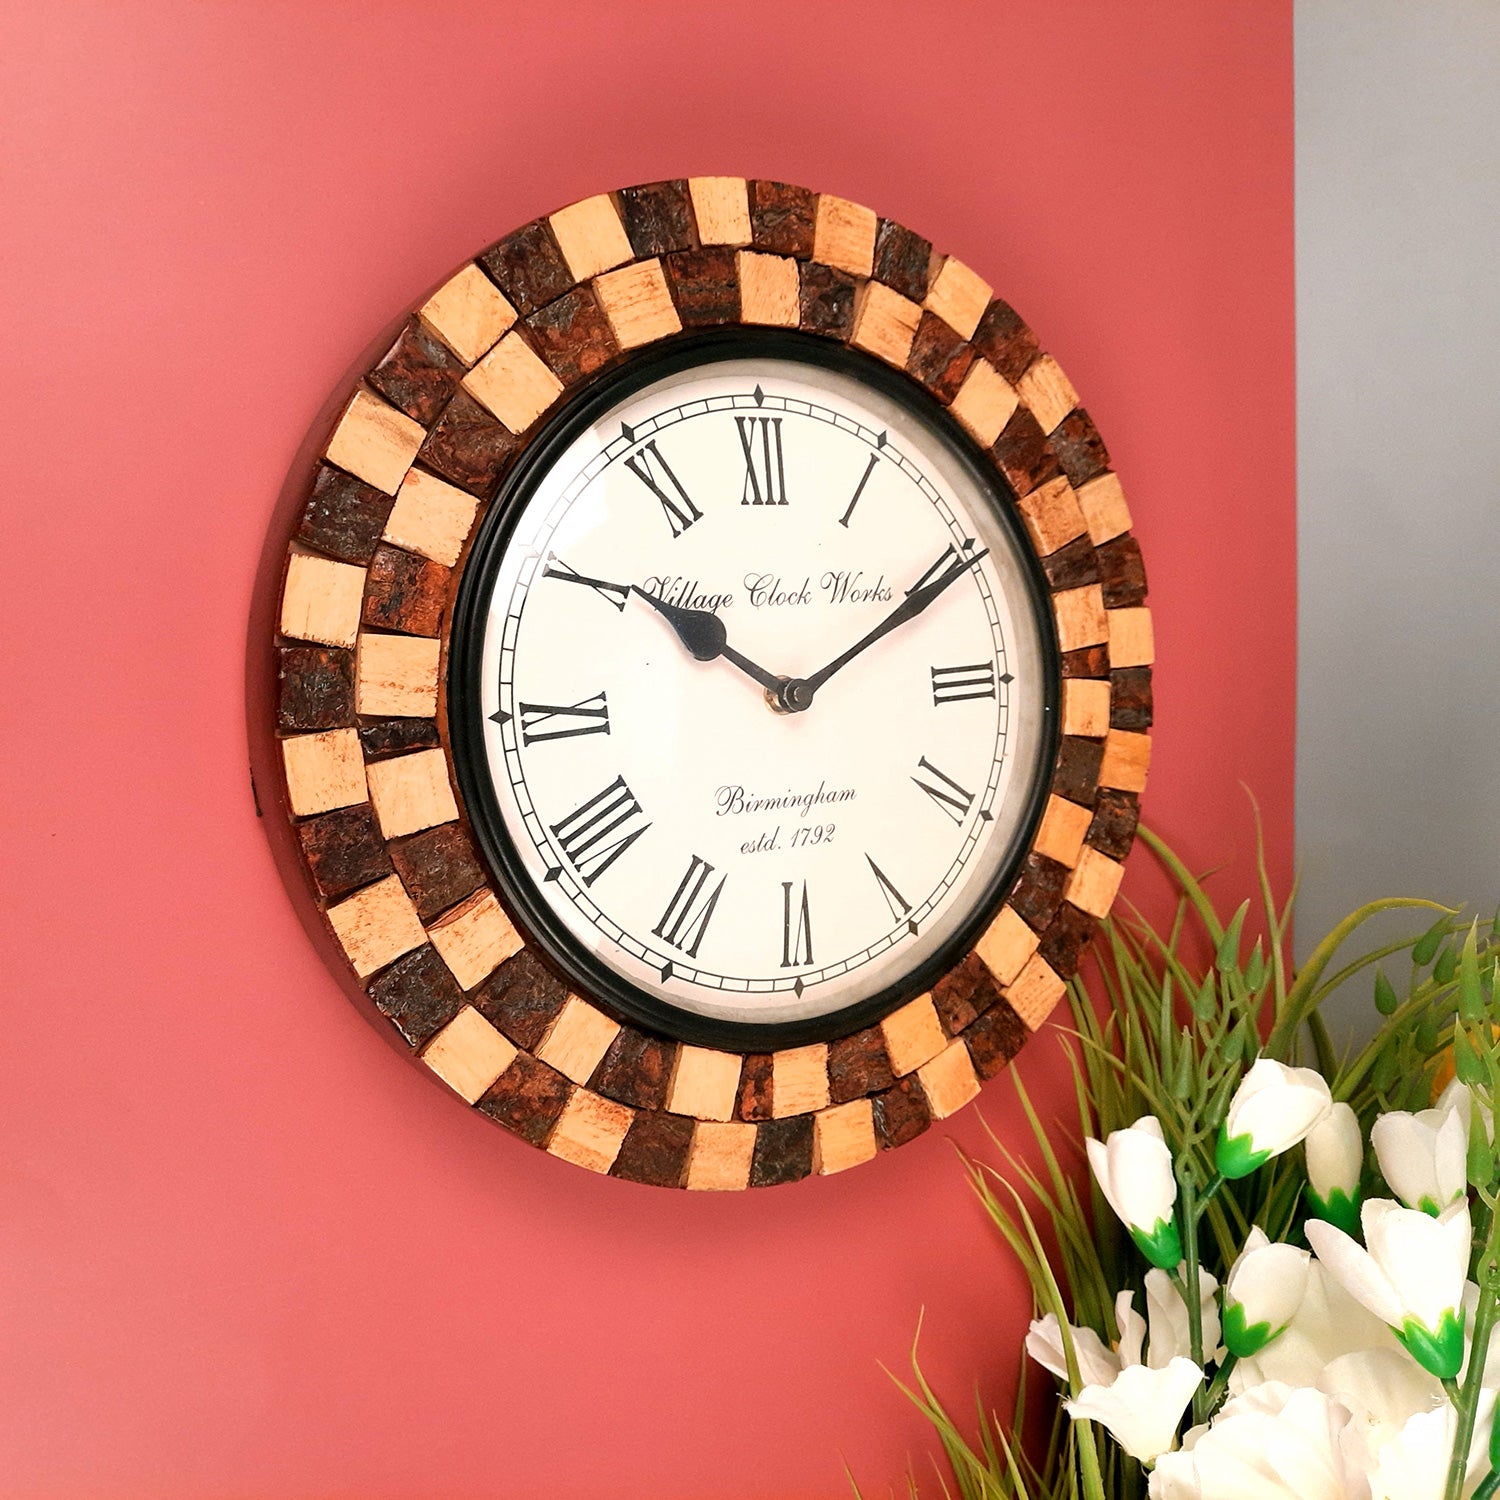 Wall Clock Wooden | Wall Mount Analogue Clock With Premium Wood Finish & Brass Work - For Home, Living Room, Bedroom, Hall Decor | Wedding & Housewarming Gift - 12 Inch